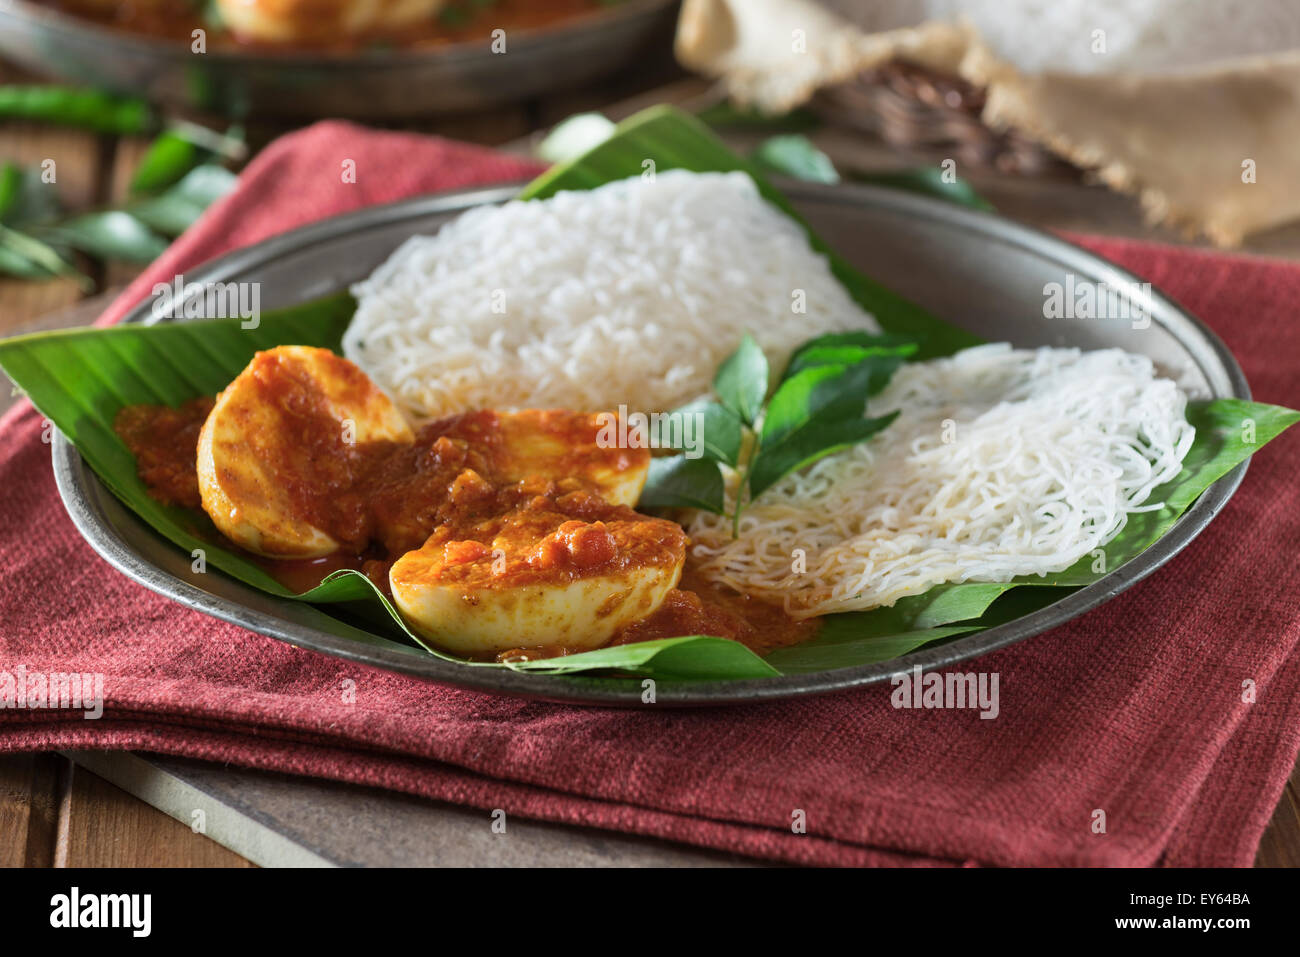 https://c8.alamy.com/comp/EY64BA/egg-curry-and-string-hoppers-sri-lanka-and-south-india-food-EY64BA.jpg